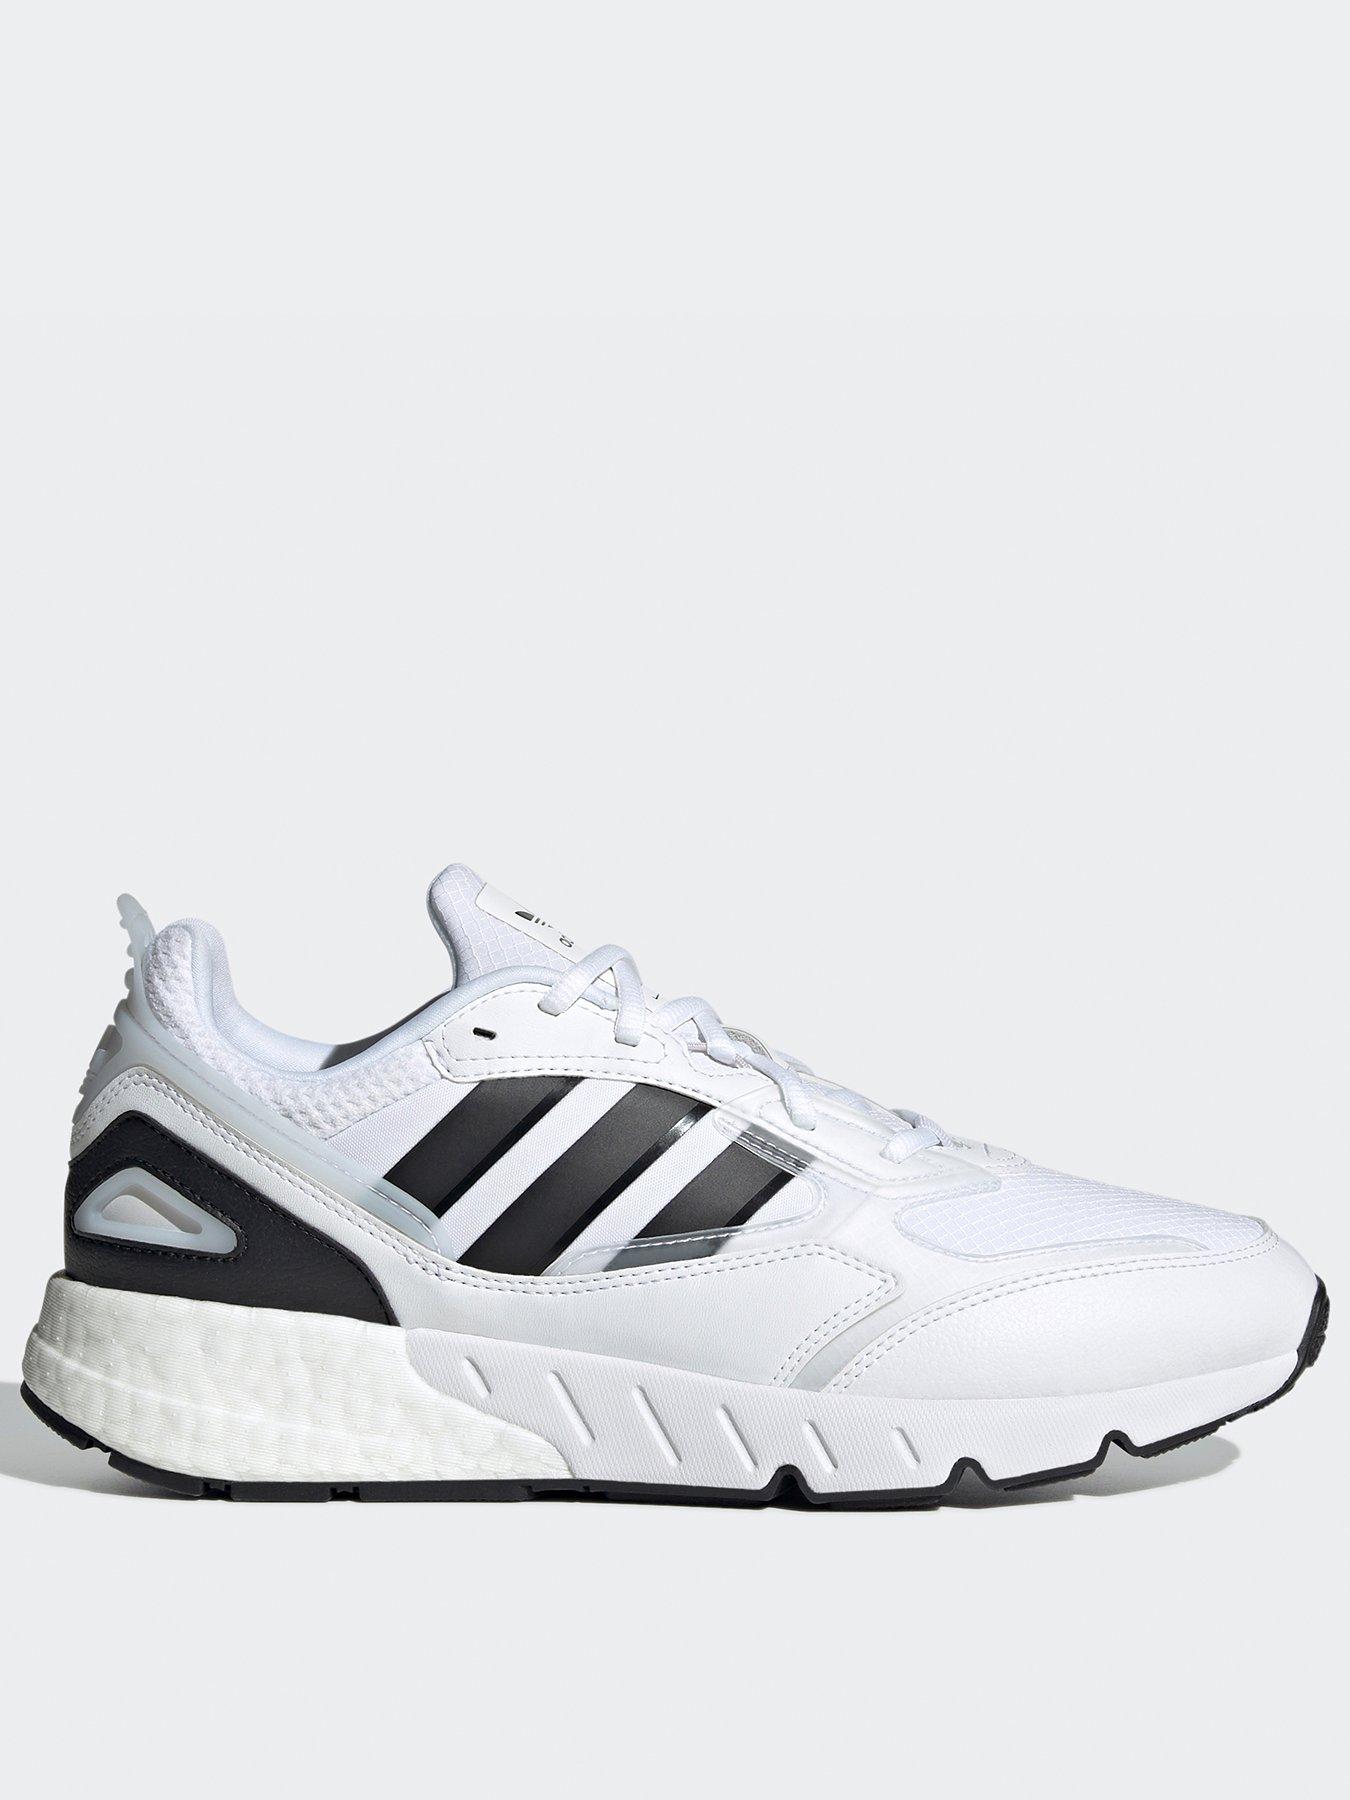 adidas Zx 1k Boost 2.0 Shoes | very.co.uk